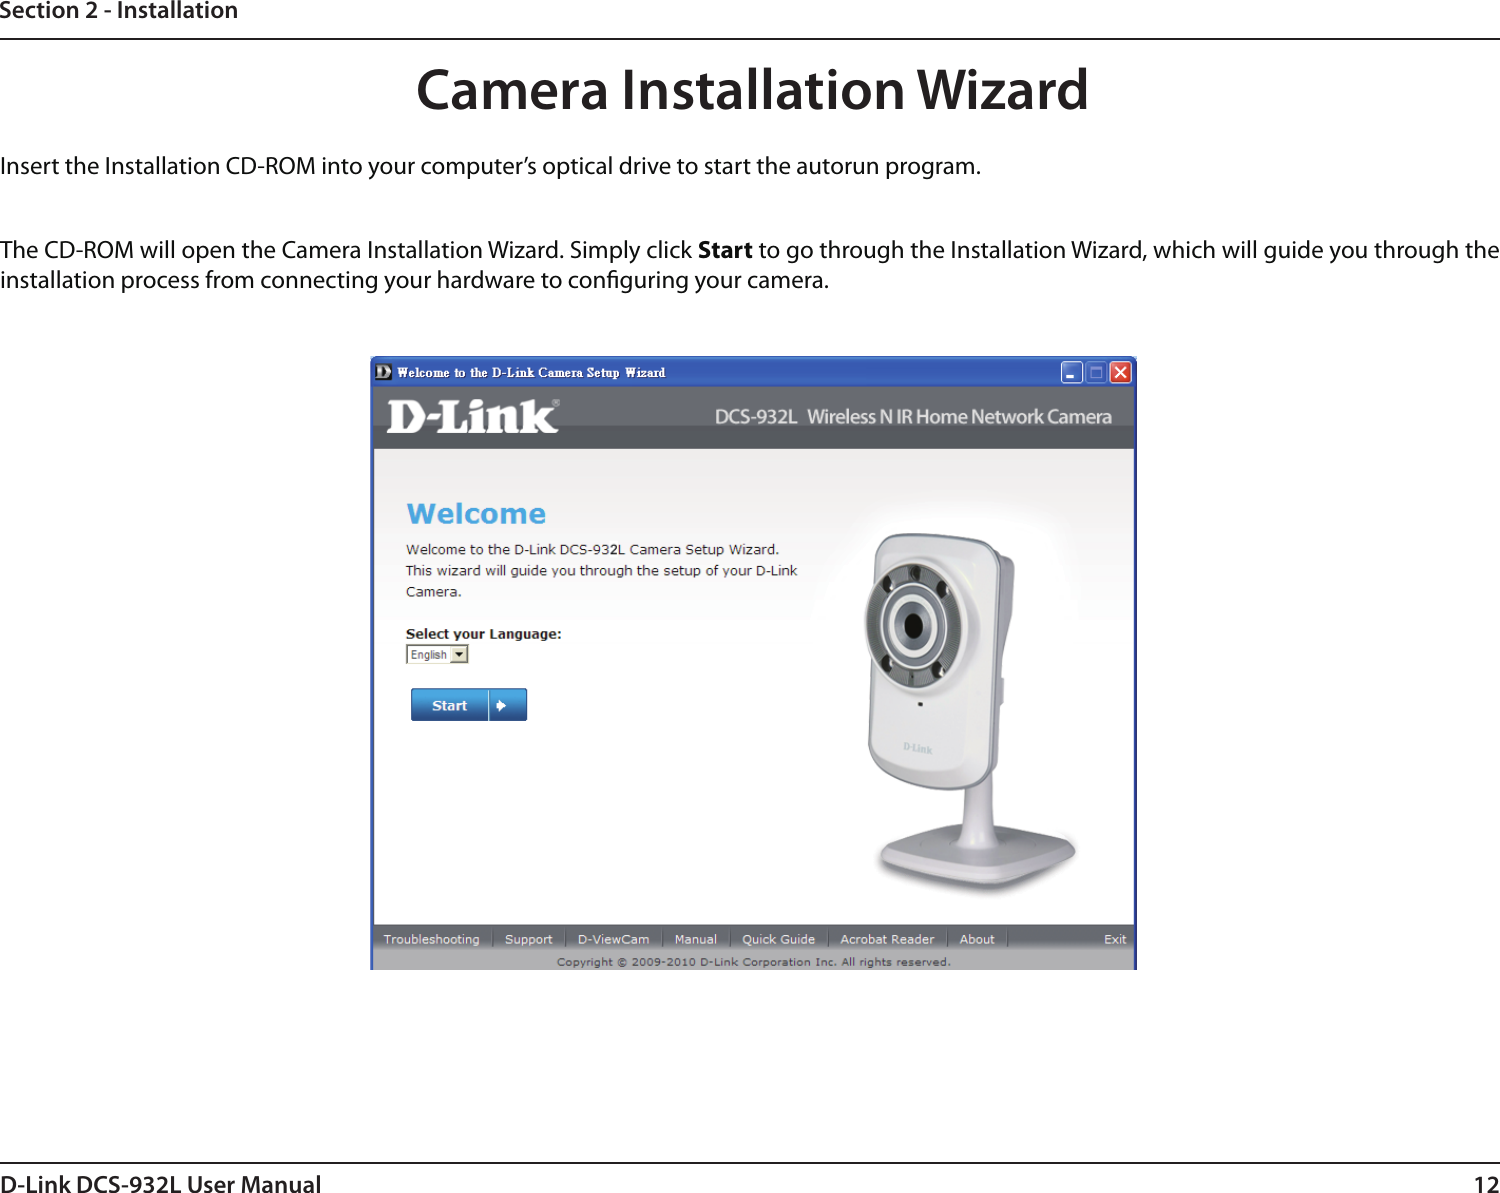 12D-Link DCS-932L User ManualSection 2 - InstallationInsert the Installation CD-ROM into your computer’s optical drive to start the autorun program. The CD-ROM will open the Camera Installation Wizard. Simply click Start to go through the Installation Wizard, which will guide you through the installation process from connecting your hardware to conguring your camera.Camera Installation Wizard